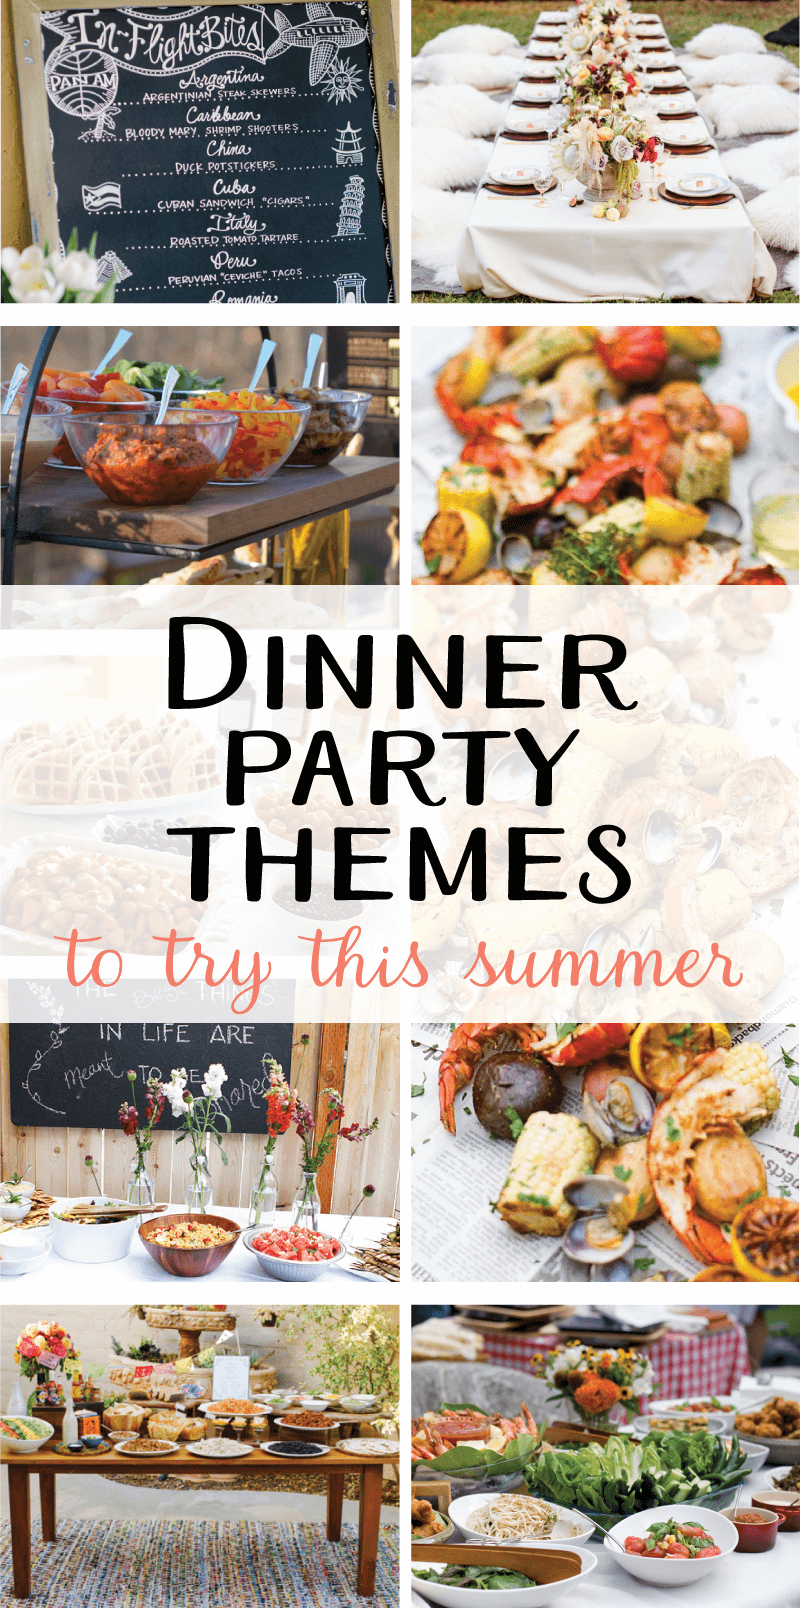 9 Creative Dinner Party Themes to try this Summer on Love the Day